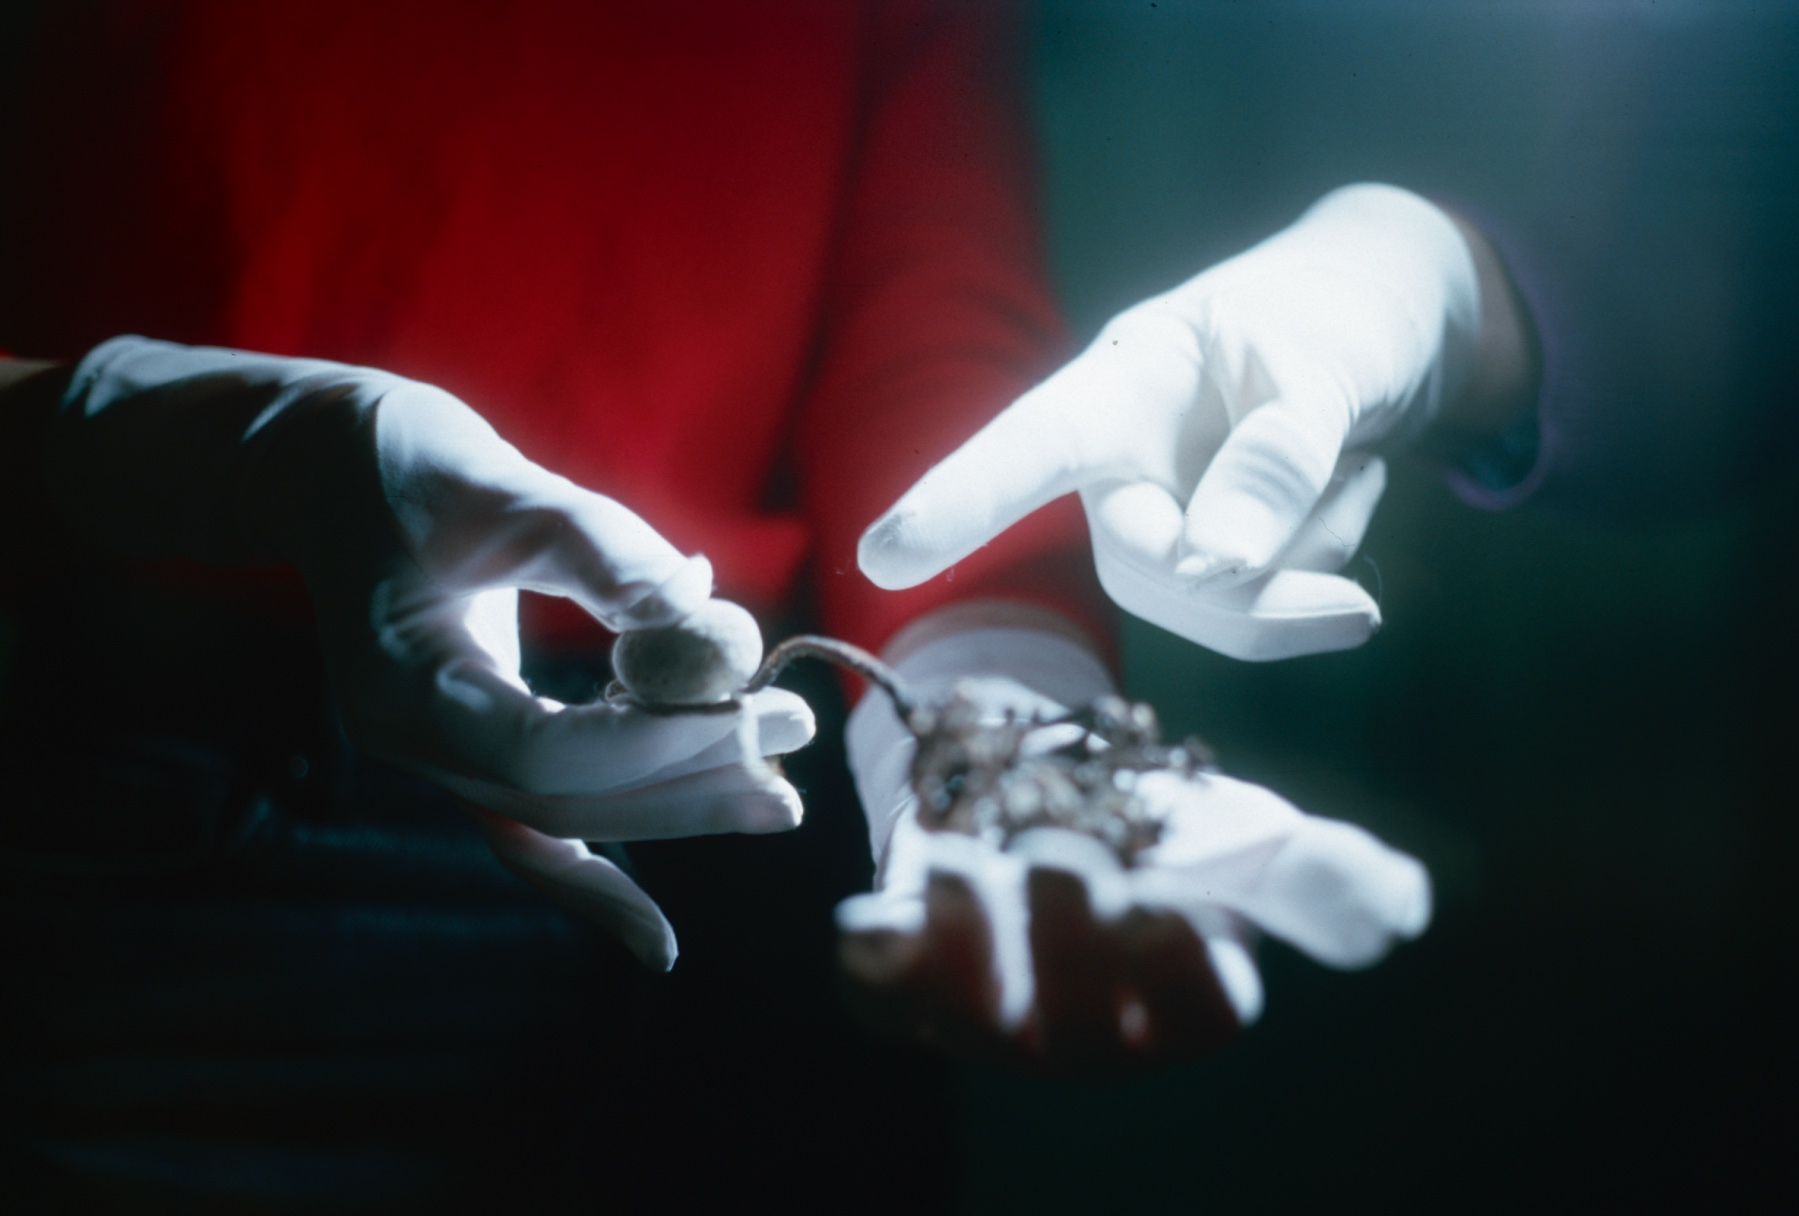 A close up photograph of two people wearing white archival gloves who are cradling a stone object 